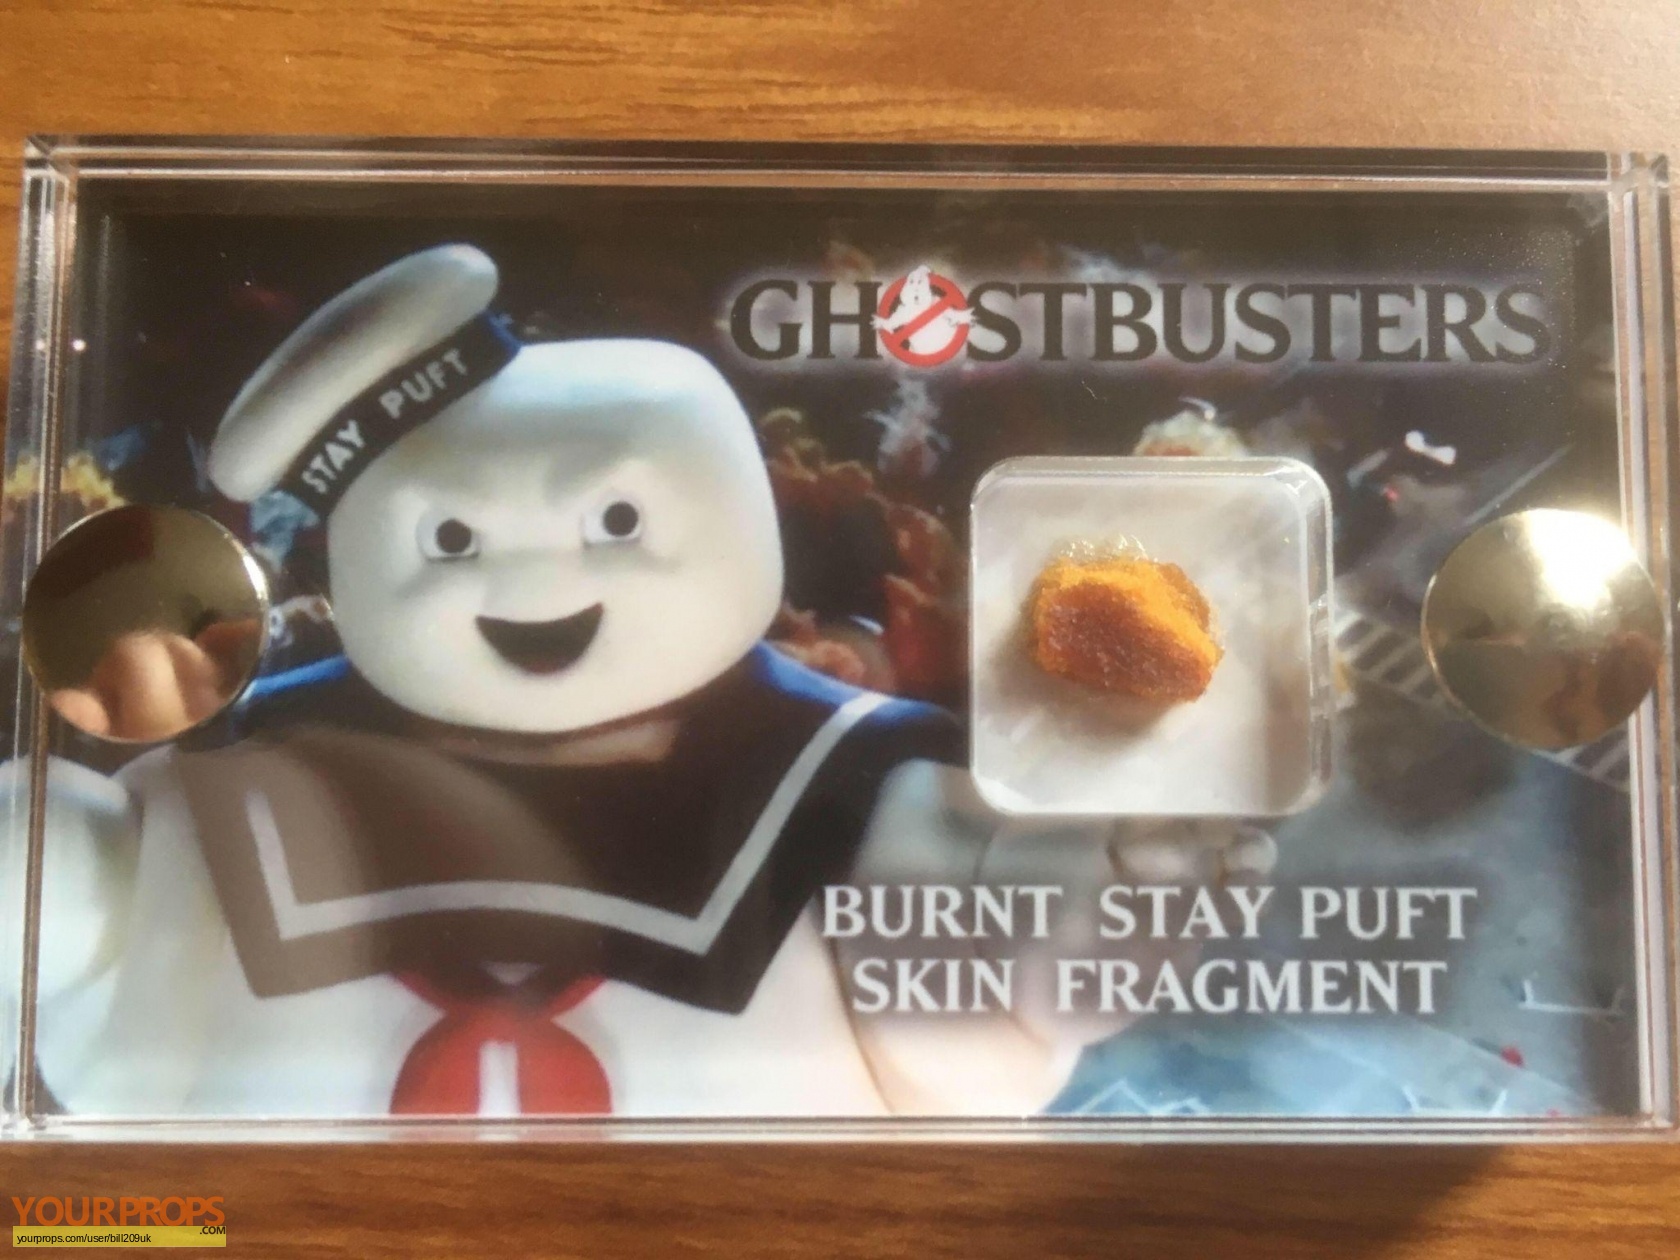 https://www.yourprops.com/movieprops/original/yp612909ae9f5d15.90963254/Ghostbusters-Burnt-Stay-Puft-Skin-Fragment-1.jpg